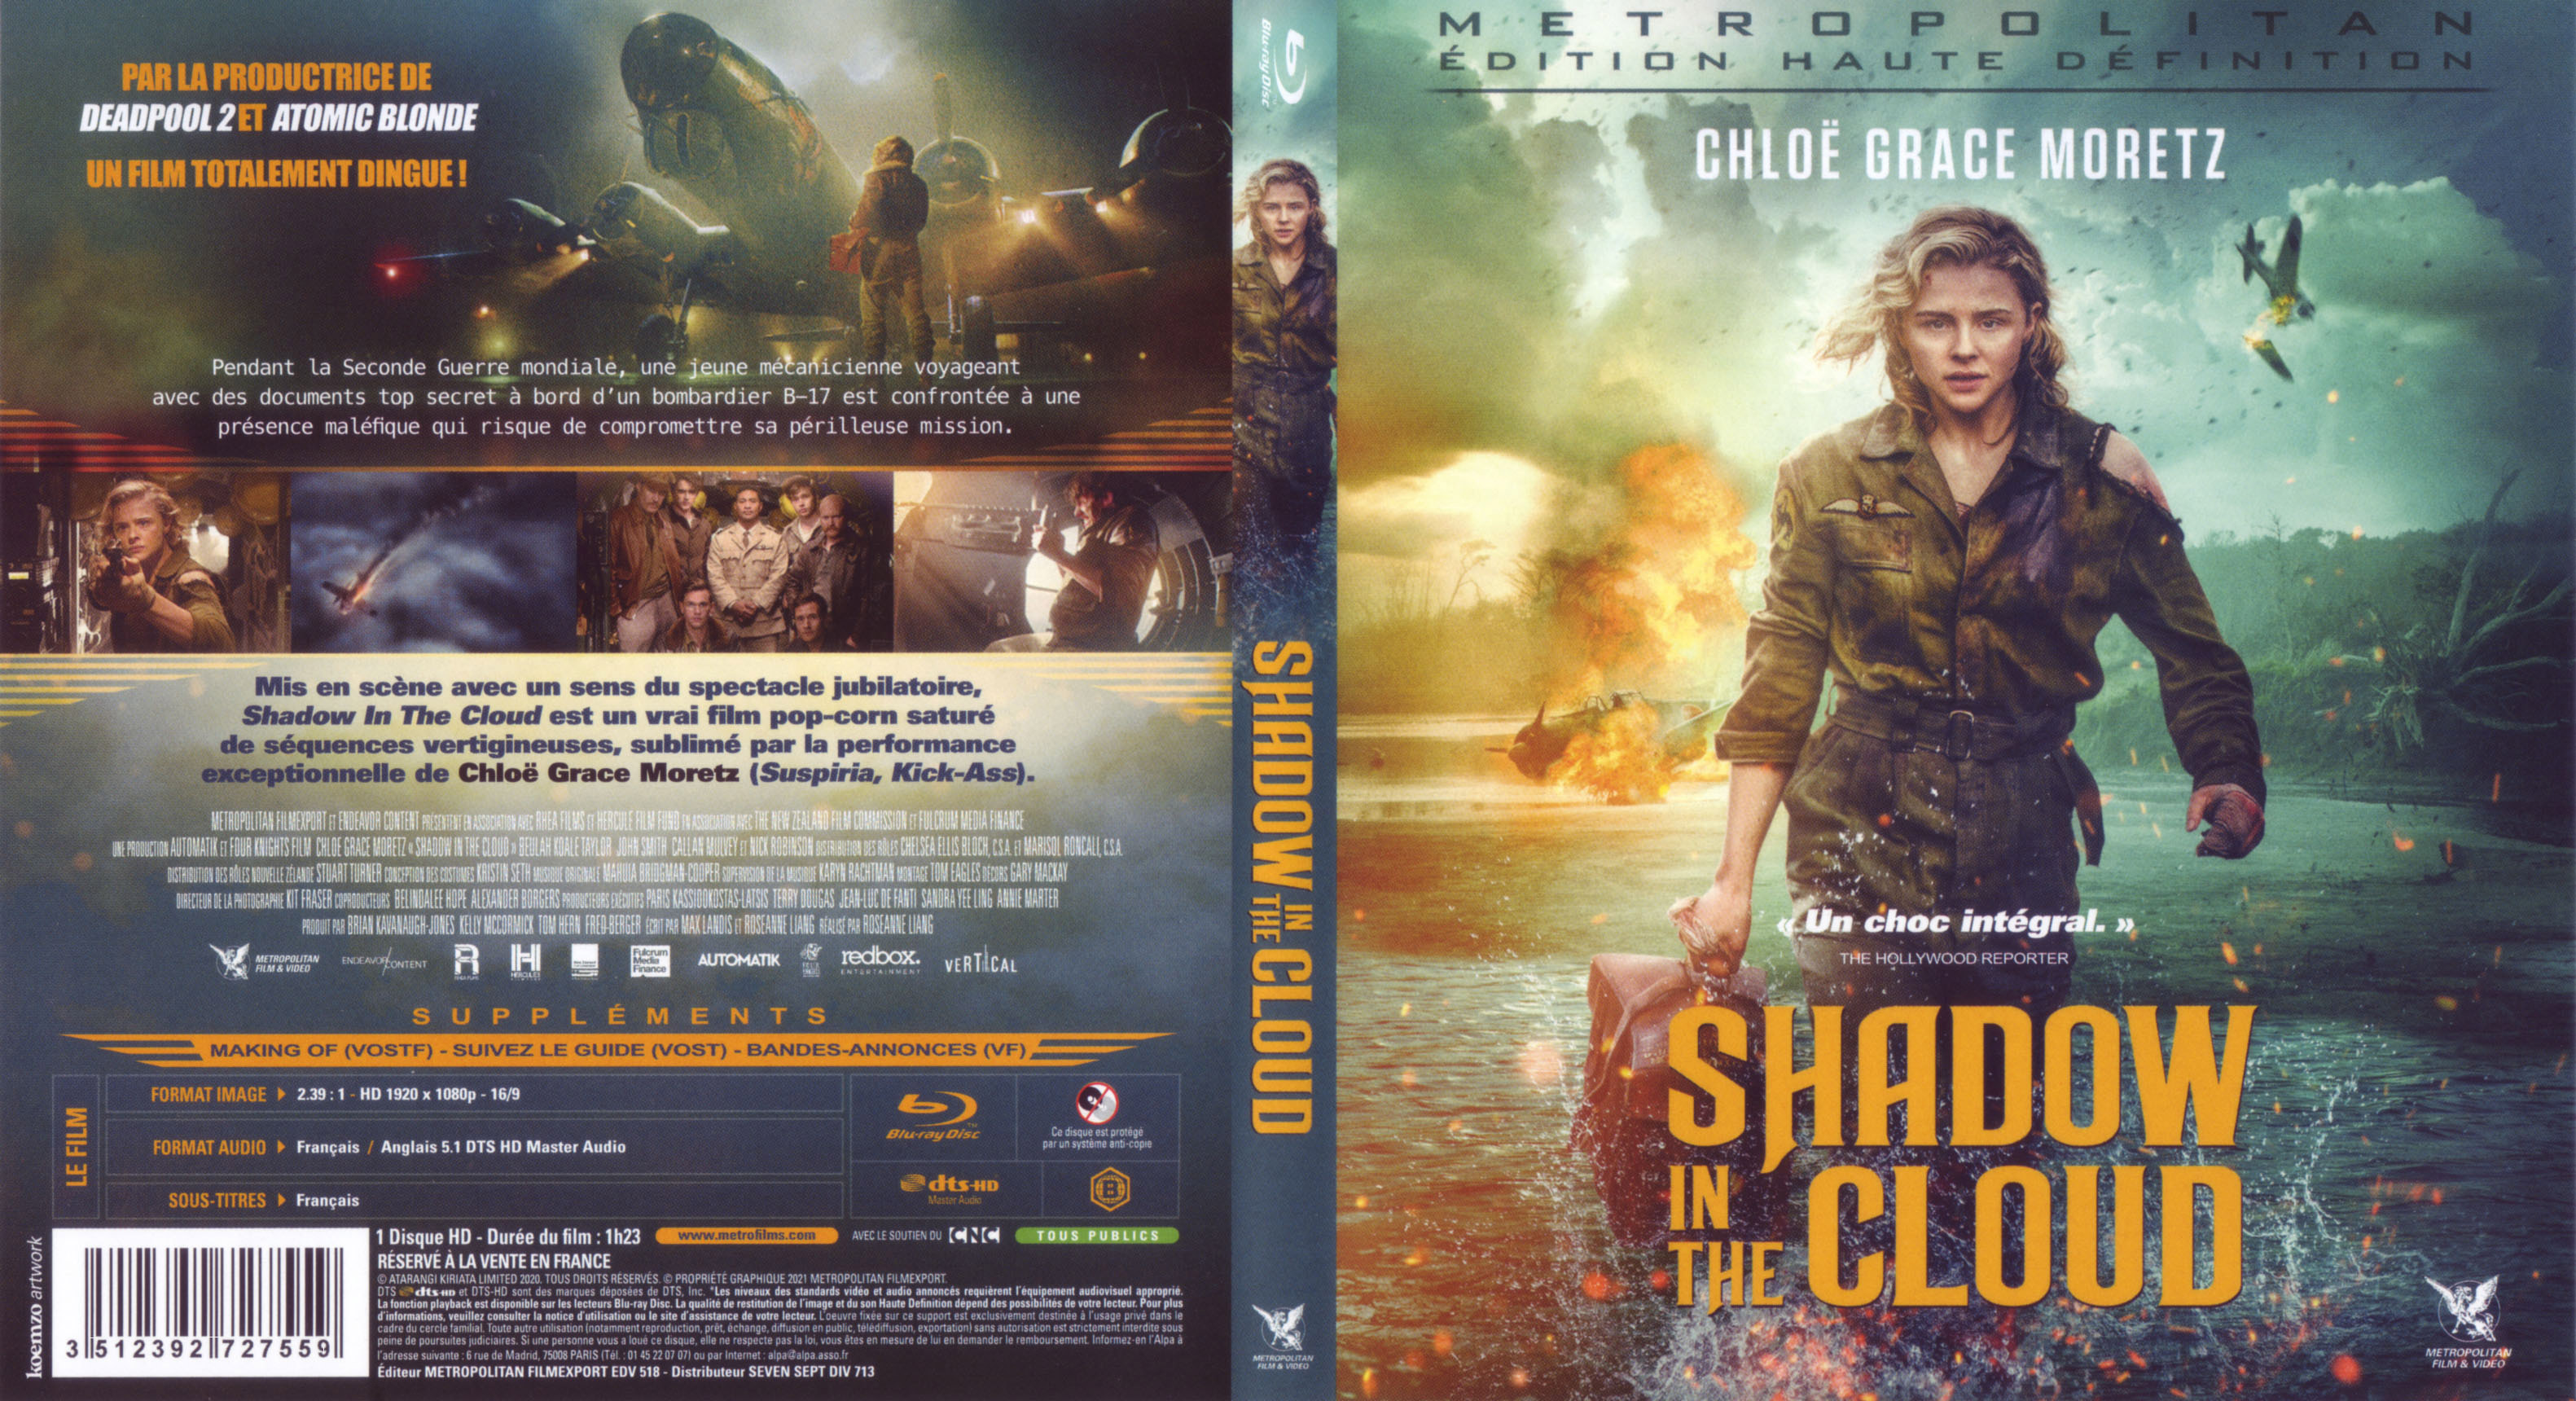 Jaquette DVD Shadow in the cloud (BLU-RAY)